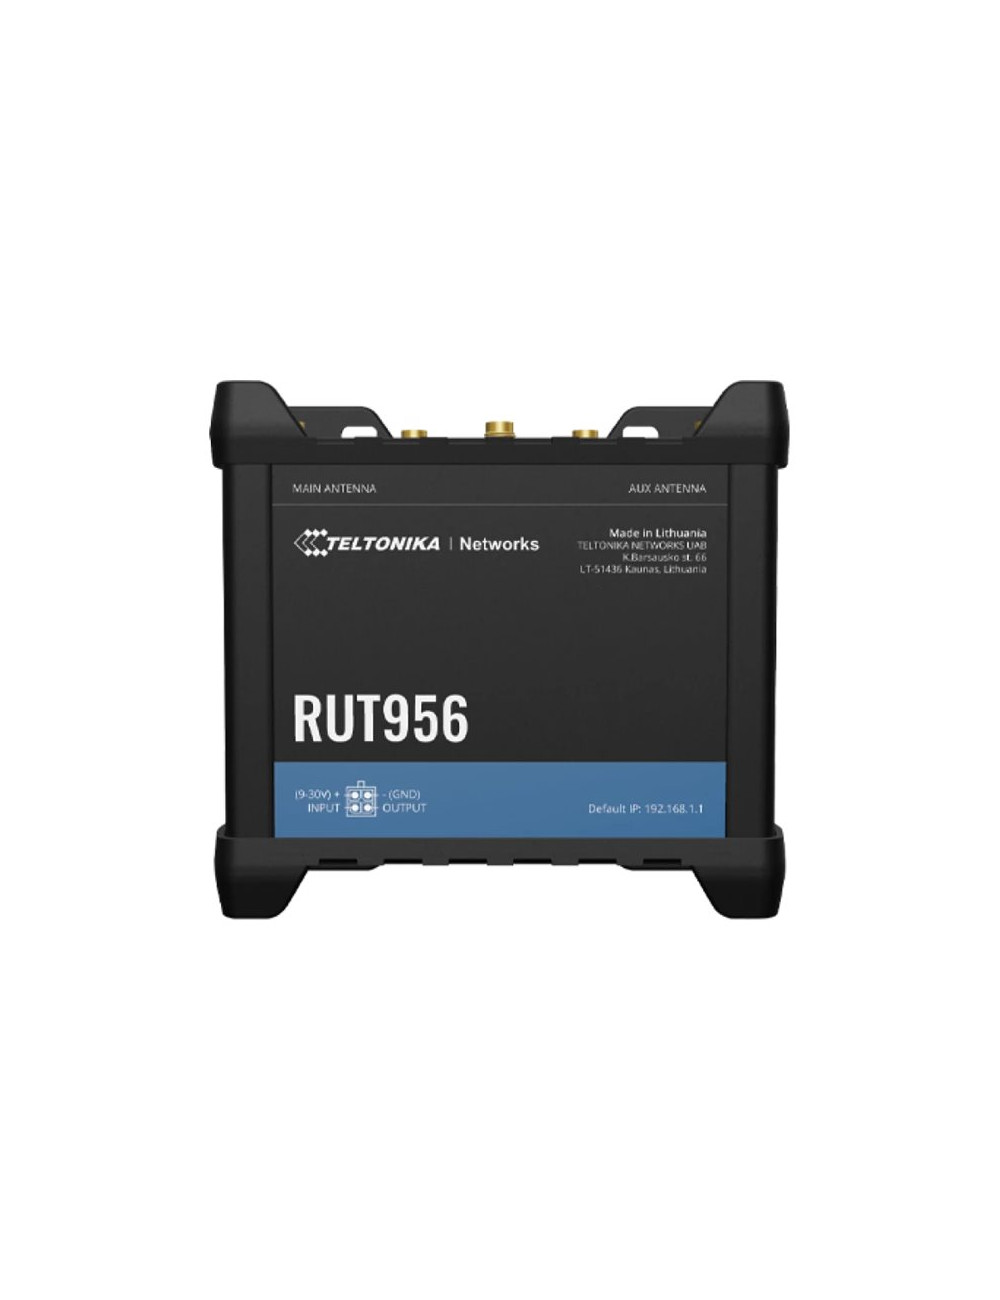 Industrial Router | RUT956 | 802.11n | Mbit/s | 10/100 Mbit/s | Ethernet LAN (RJ-45) ports 4 | Mesh Support No | MU-MiMO No | 2G